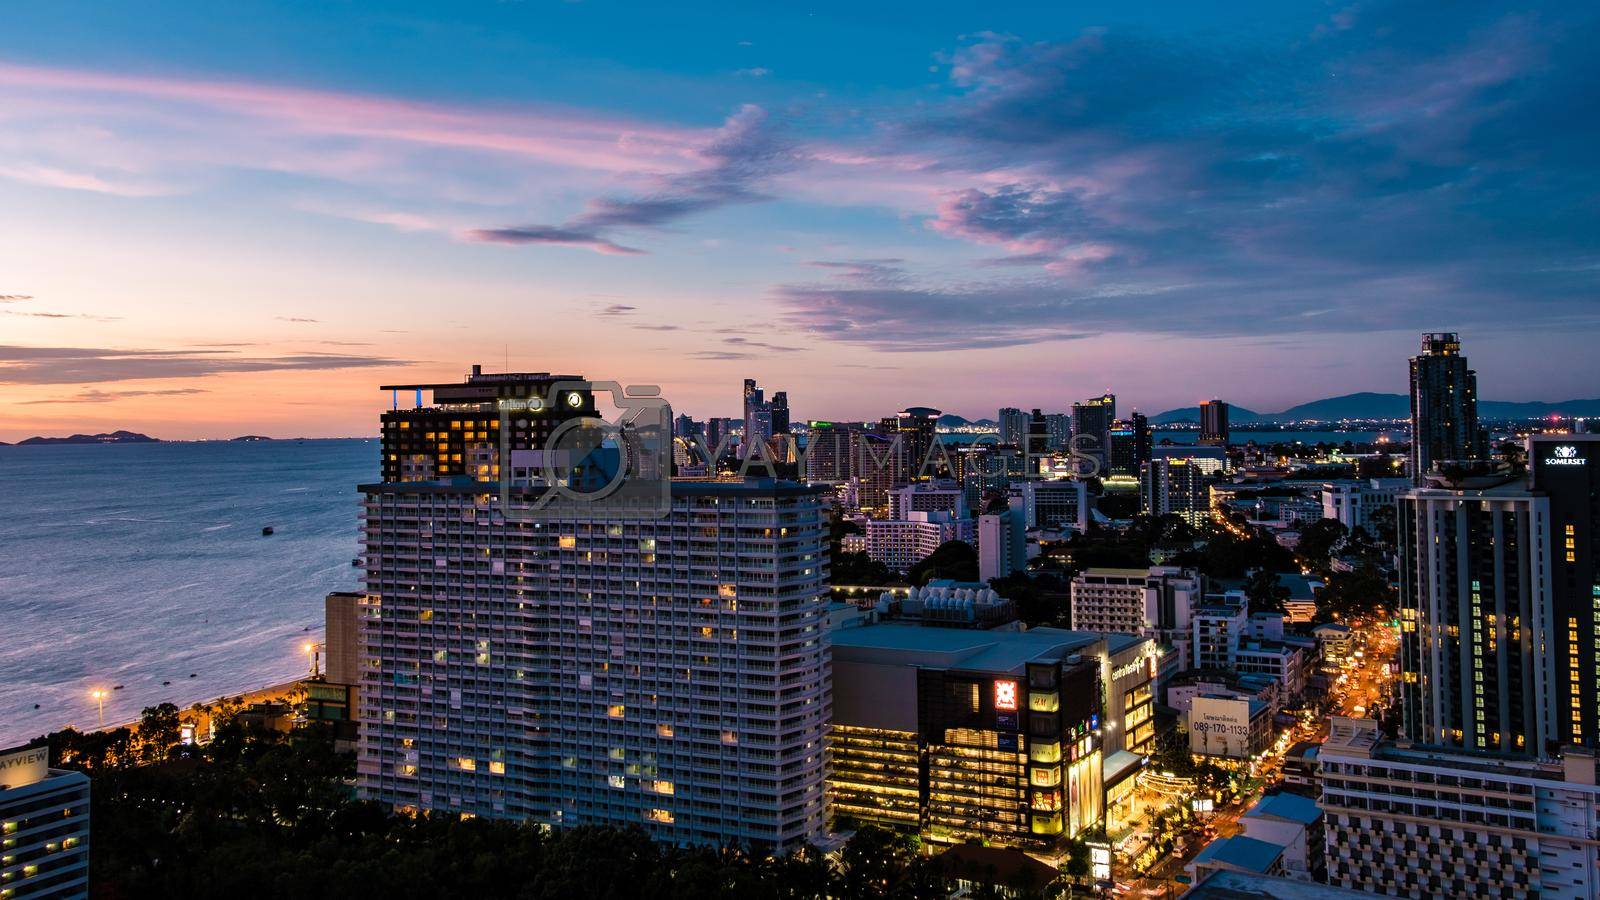 Royalty free image of Pattaya Thailand May 2022 , sunset Pattaya Thailand skyline of the city with hotels and skyscraper by fokkebok